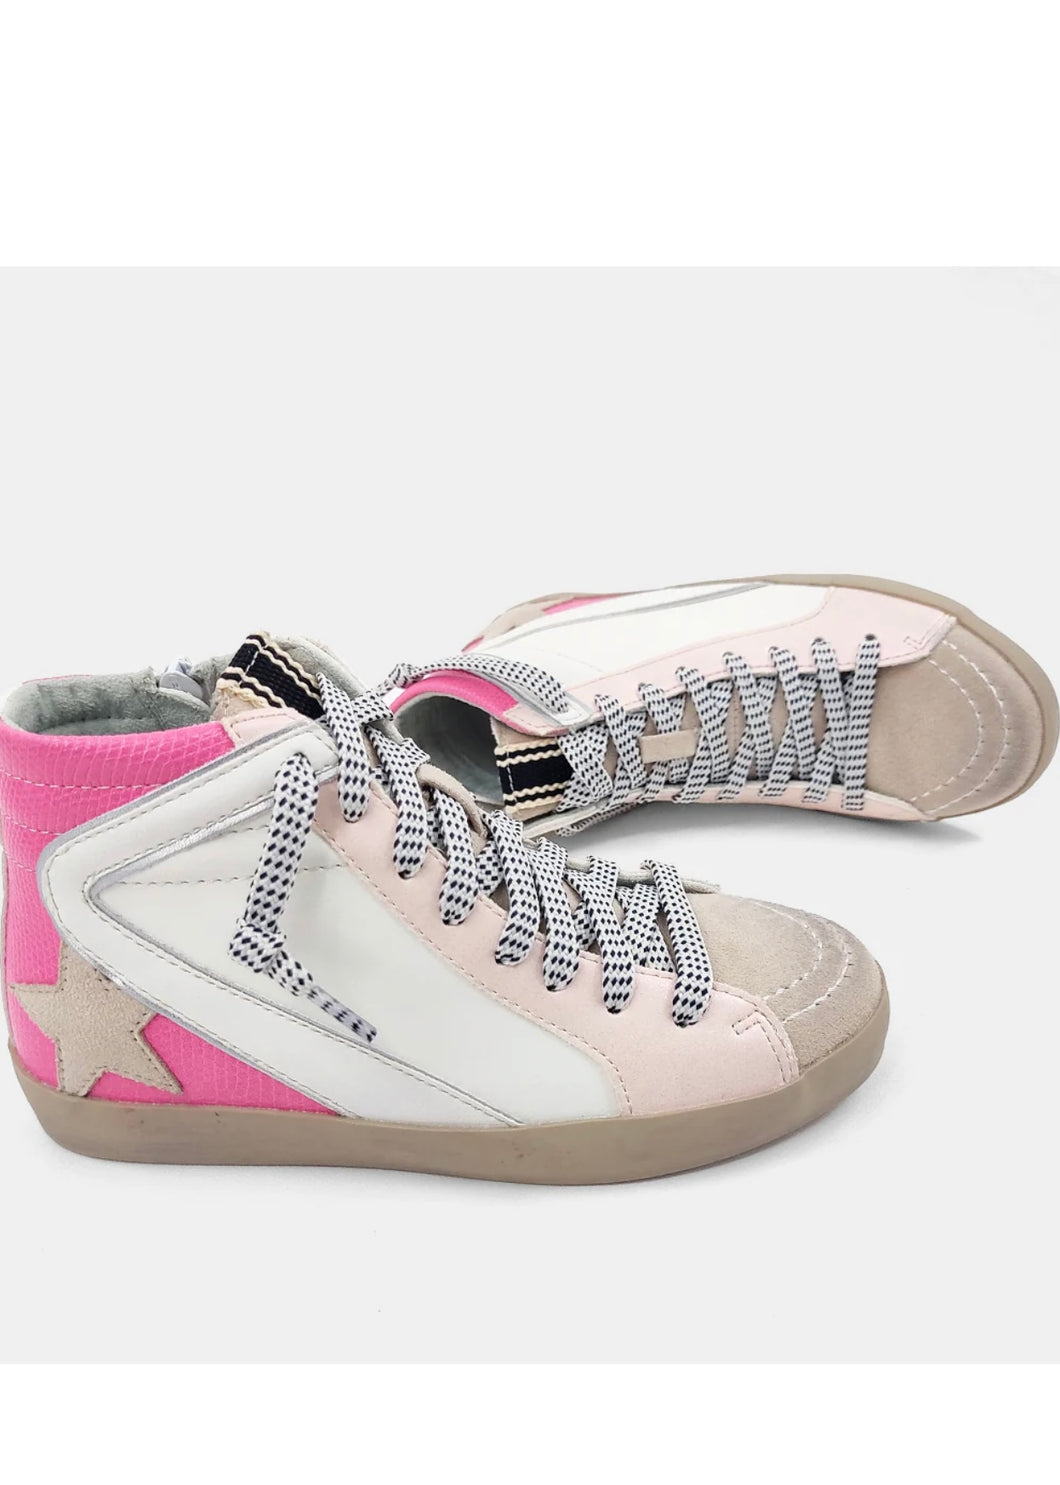 Kid and Toddler Pink High Tops